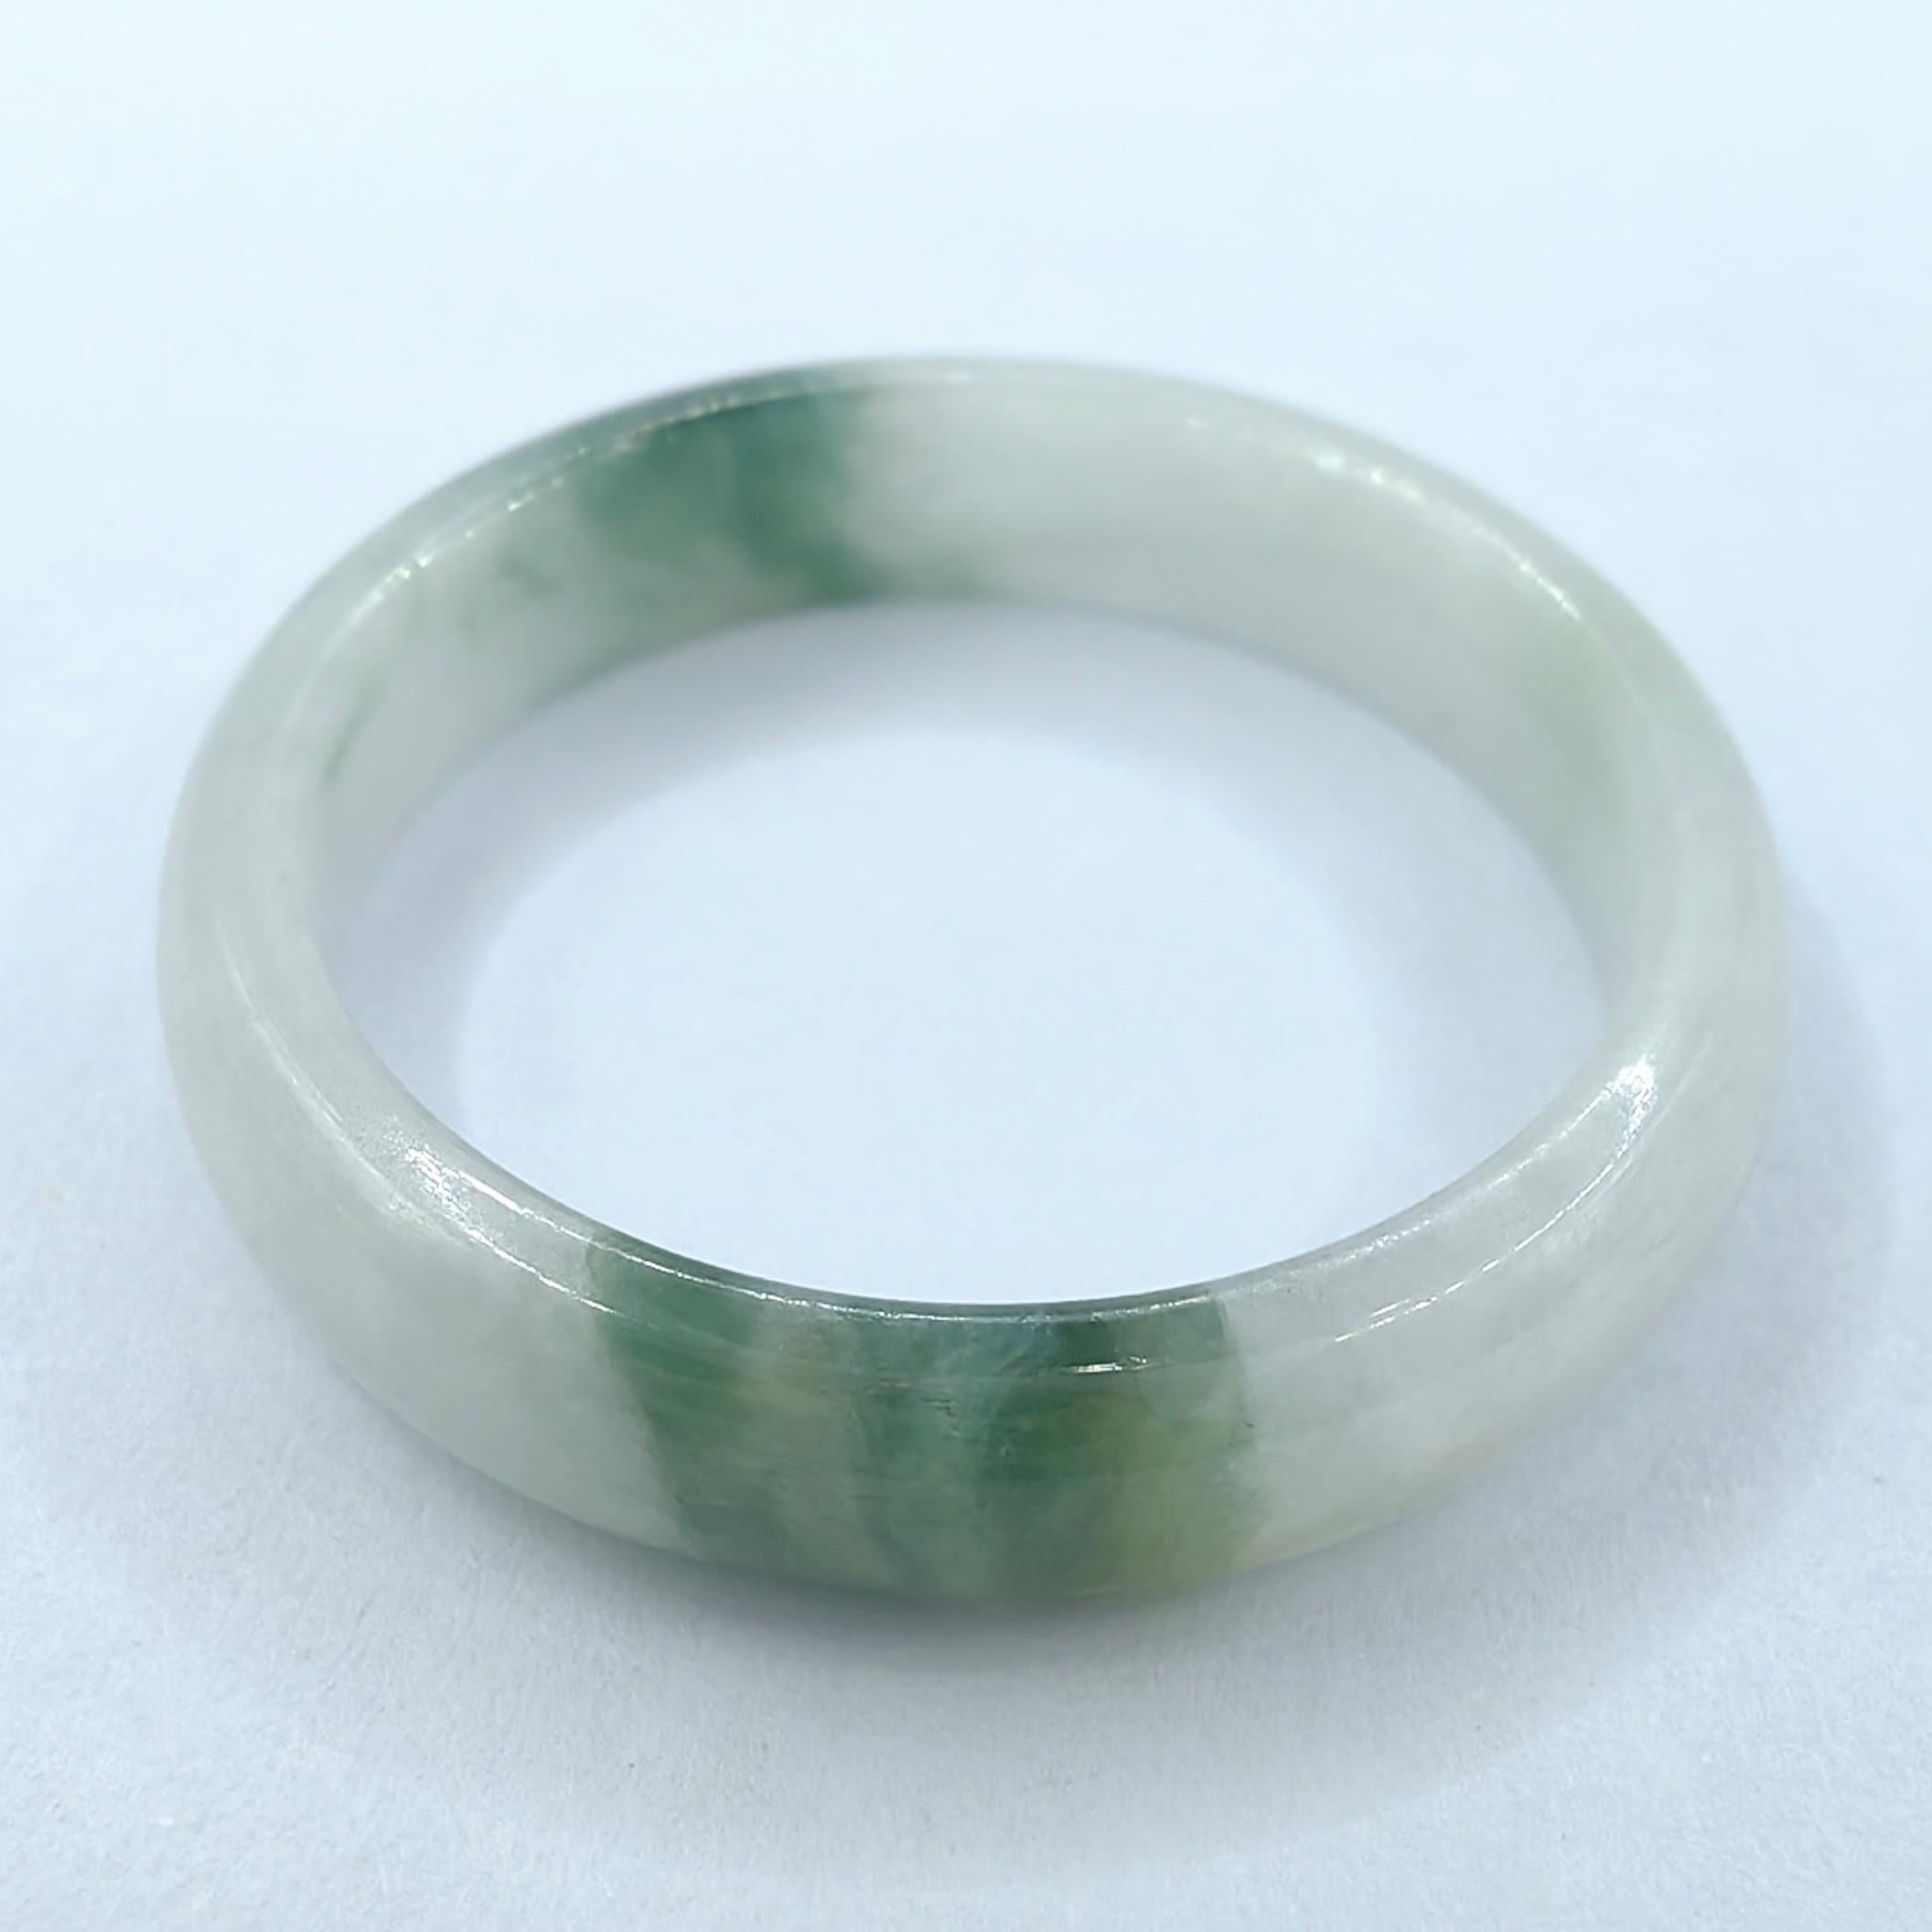 Introducing our Genuine Moss in Snow Serpentine Jade Ring, a captivating piece crafted entirely from genuine Serpentine Jade. This exquisite gemstone takes center stage, showcasing its mesmerizing beauty and natural allure. Meticulously crafted with